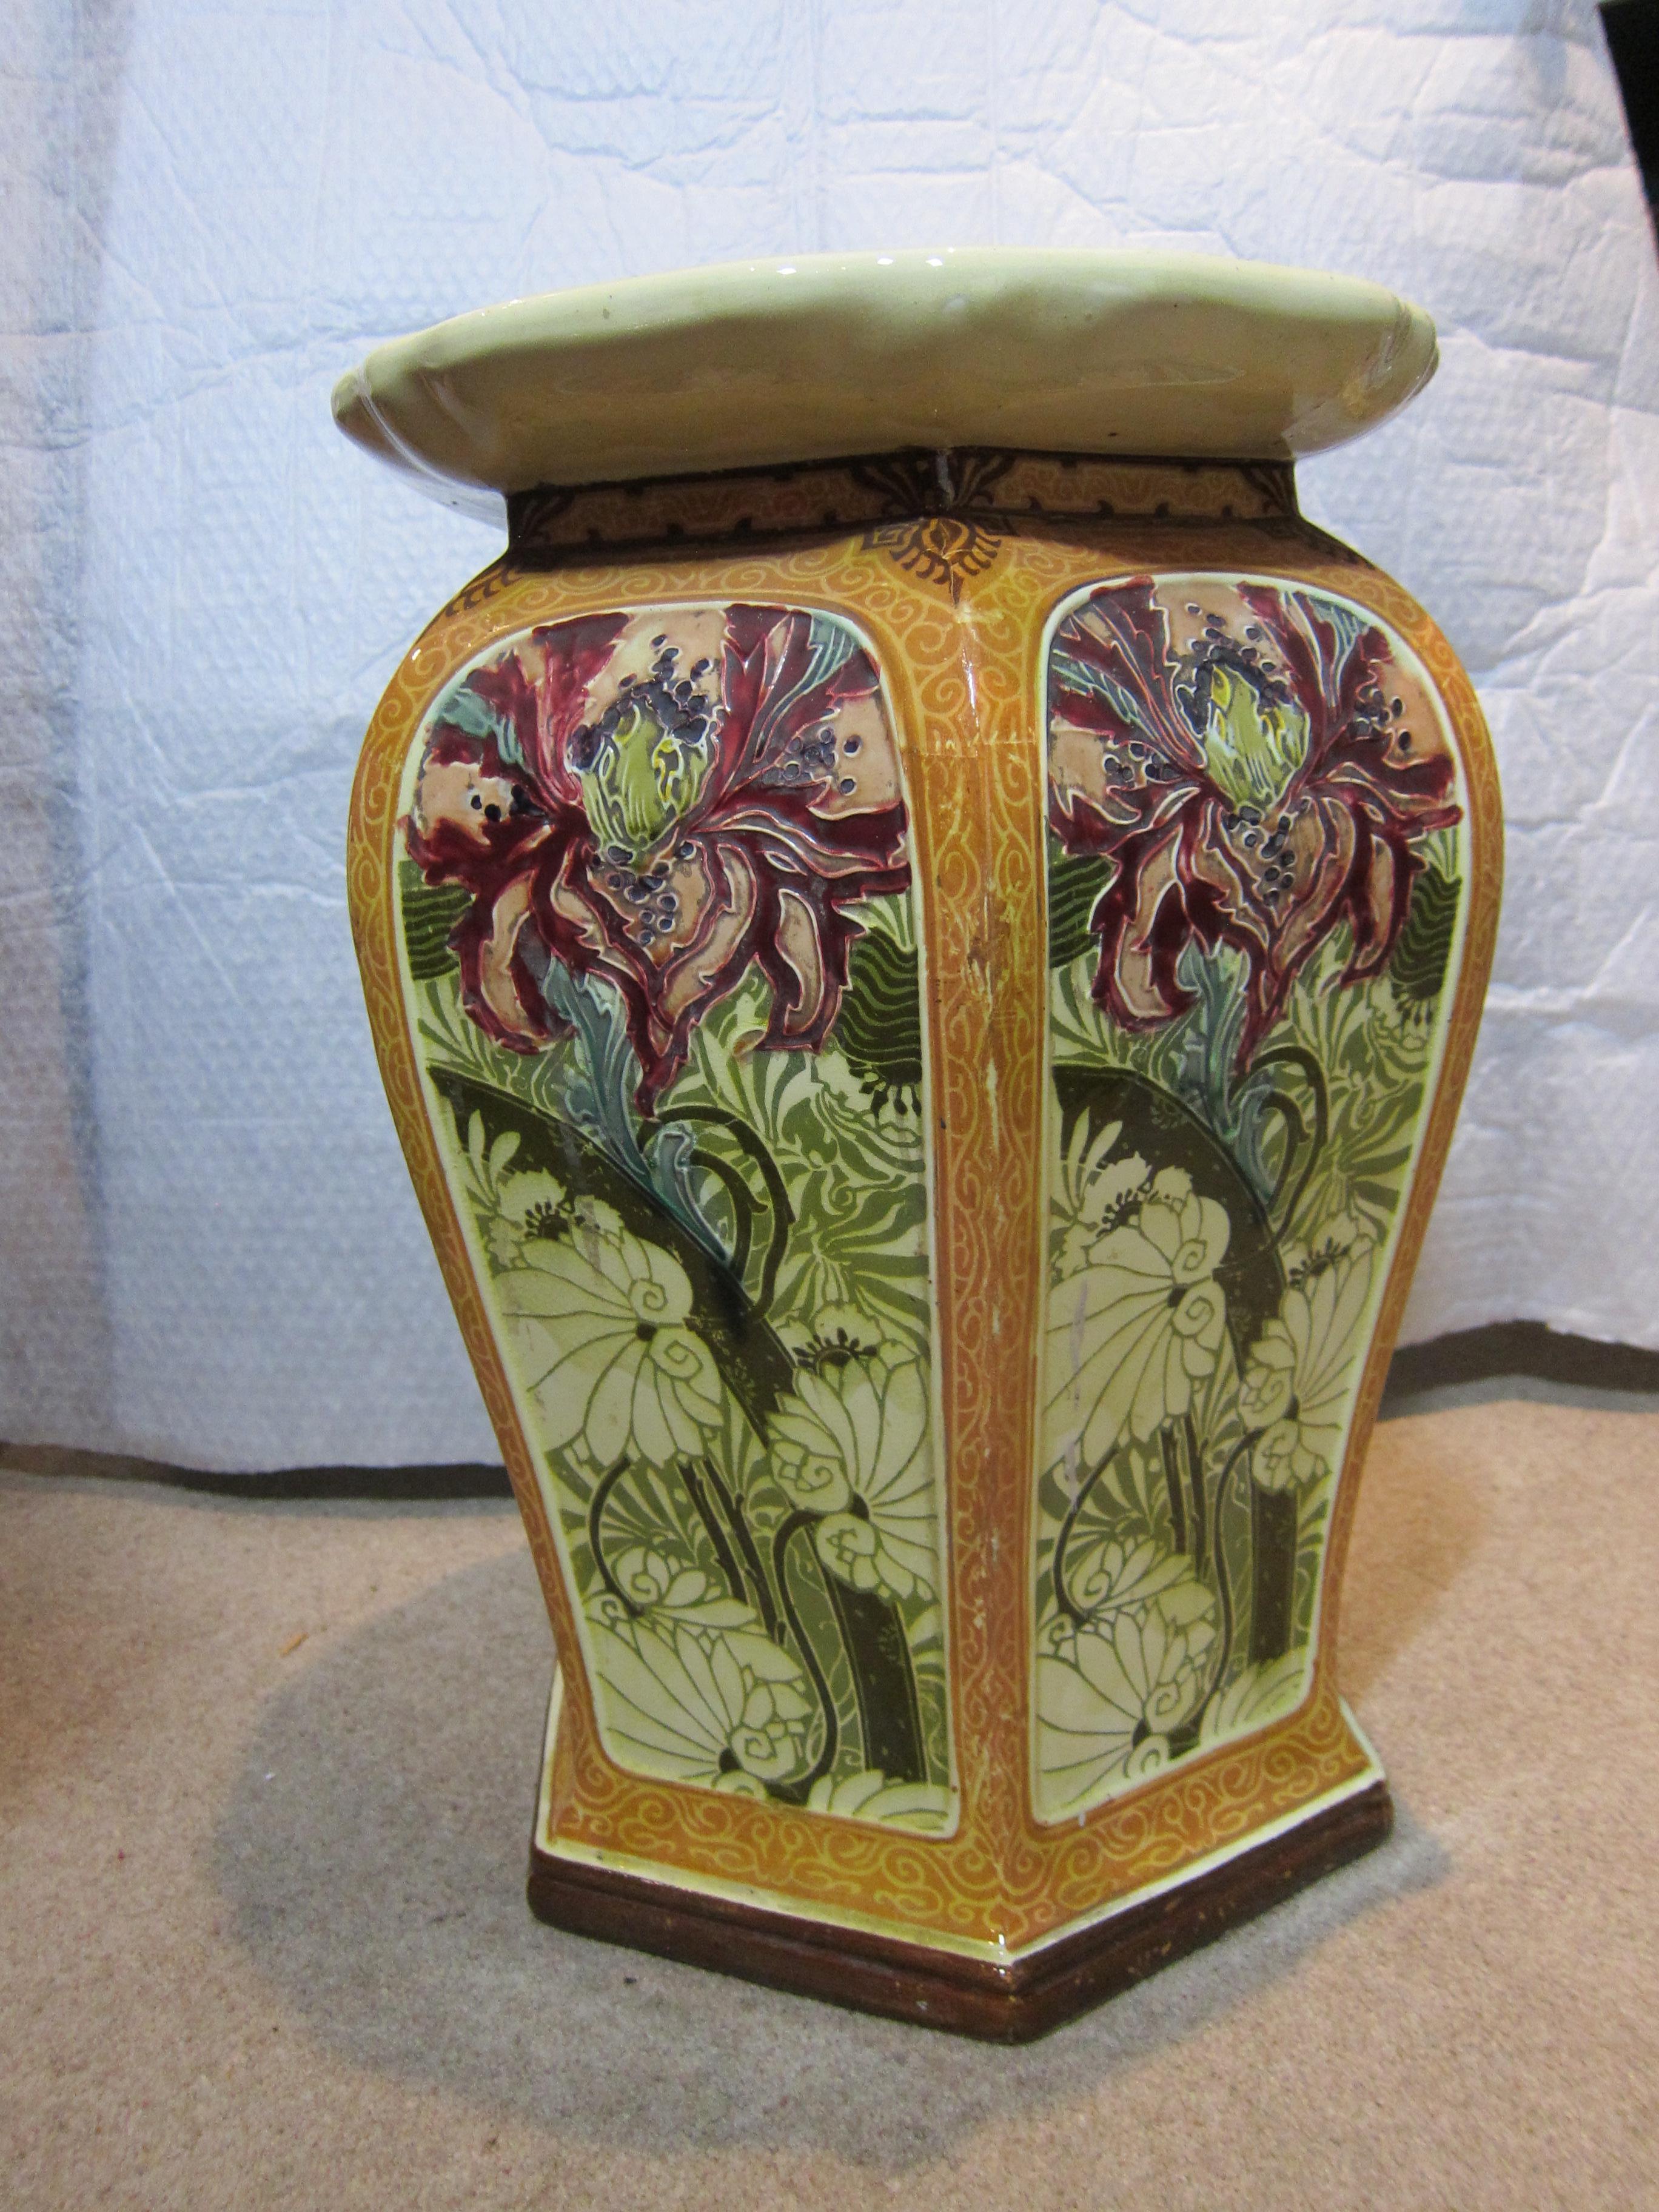 An antique Mintons impressed mark pottery hexagonal garden seat with a floral design on each panel in Secessionist style and a yellow border. Ideal for a small table beside a sofa!